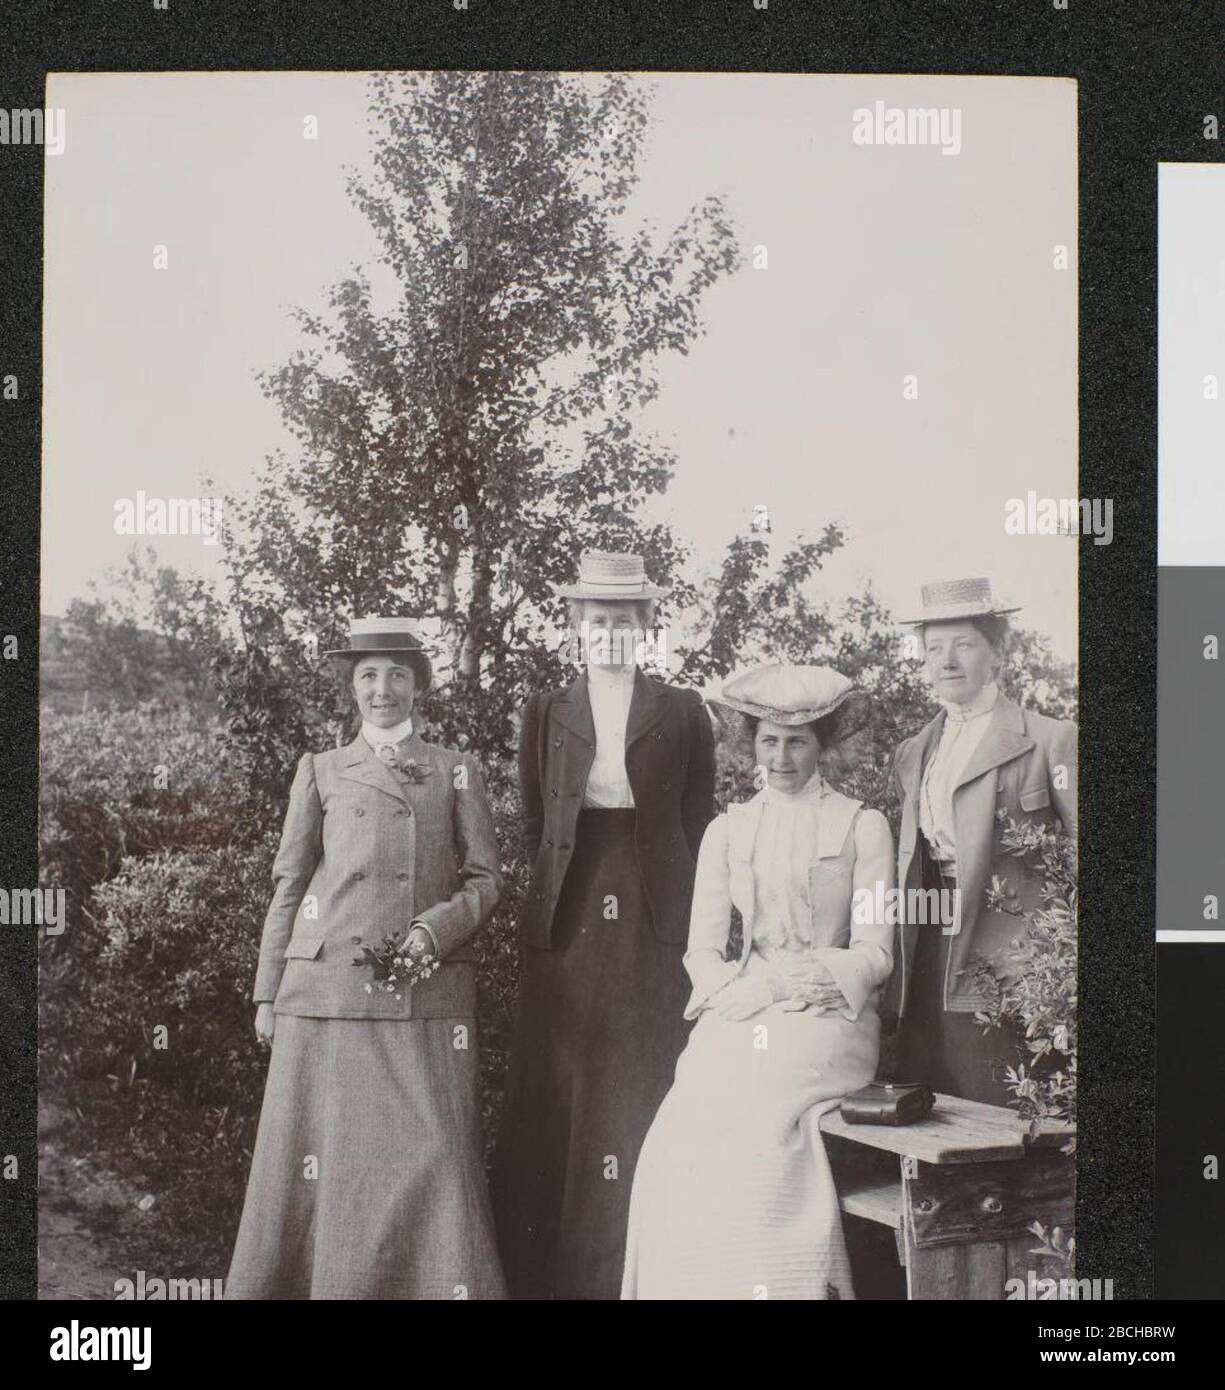 English: The Norwegian author Nini Roll Anker (left) and three other,  unknown women between 1880 and 1913 (probably around 1900, Anker was born  in 1873). Norsk bokmål: Den norske forfatteren Nini Roll